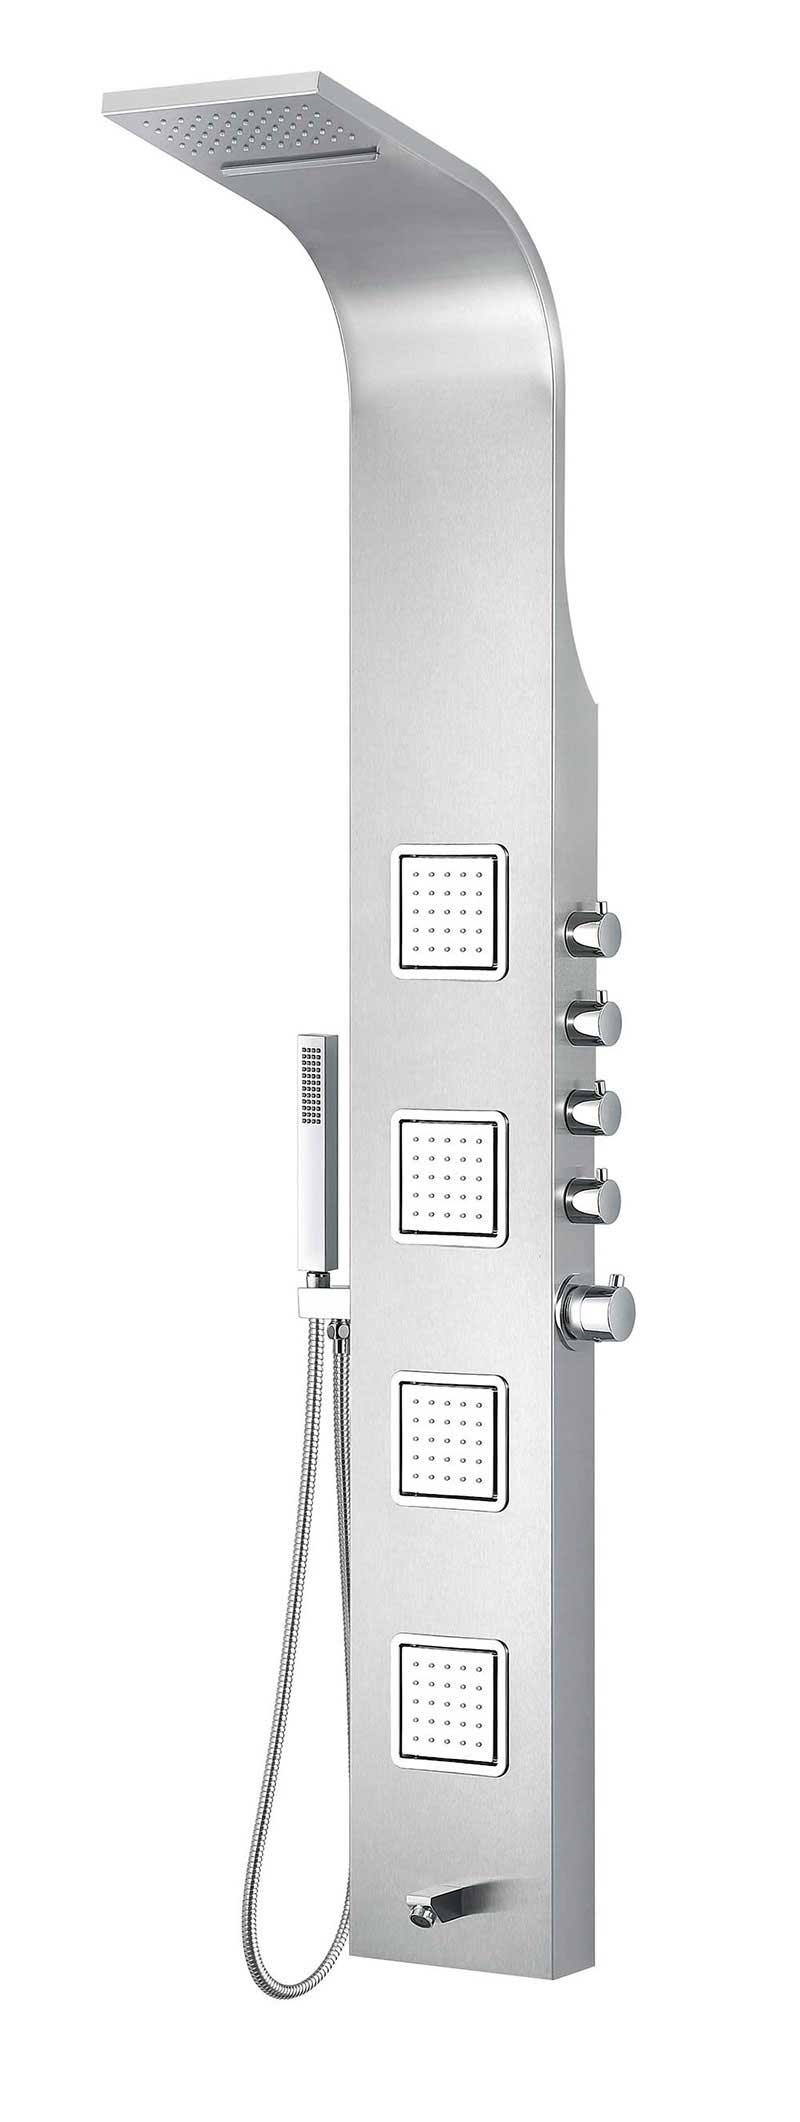 Anzzi MESA Series 64 in. Full Body Shower Panel System with Heavy Rain Shower and Spray Wand in Brushed Steel